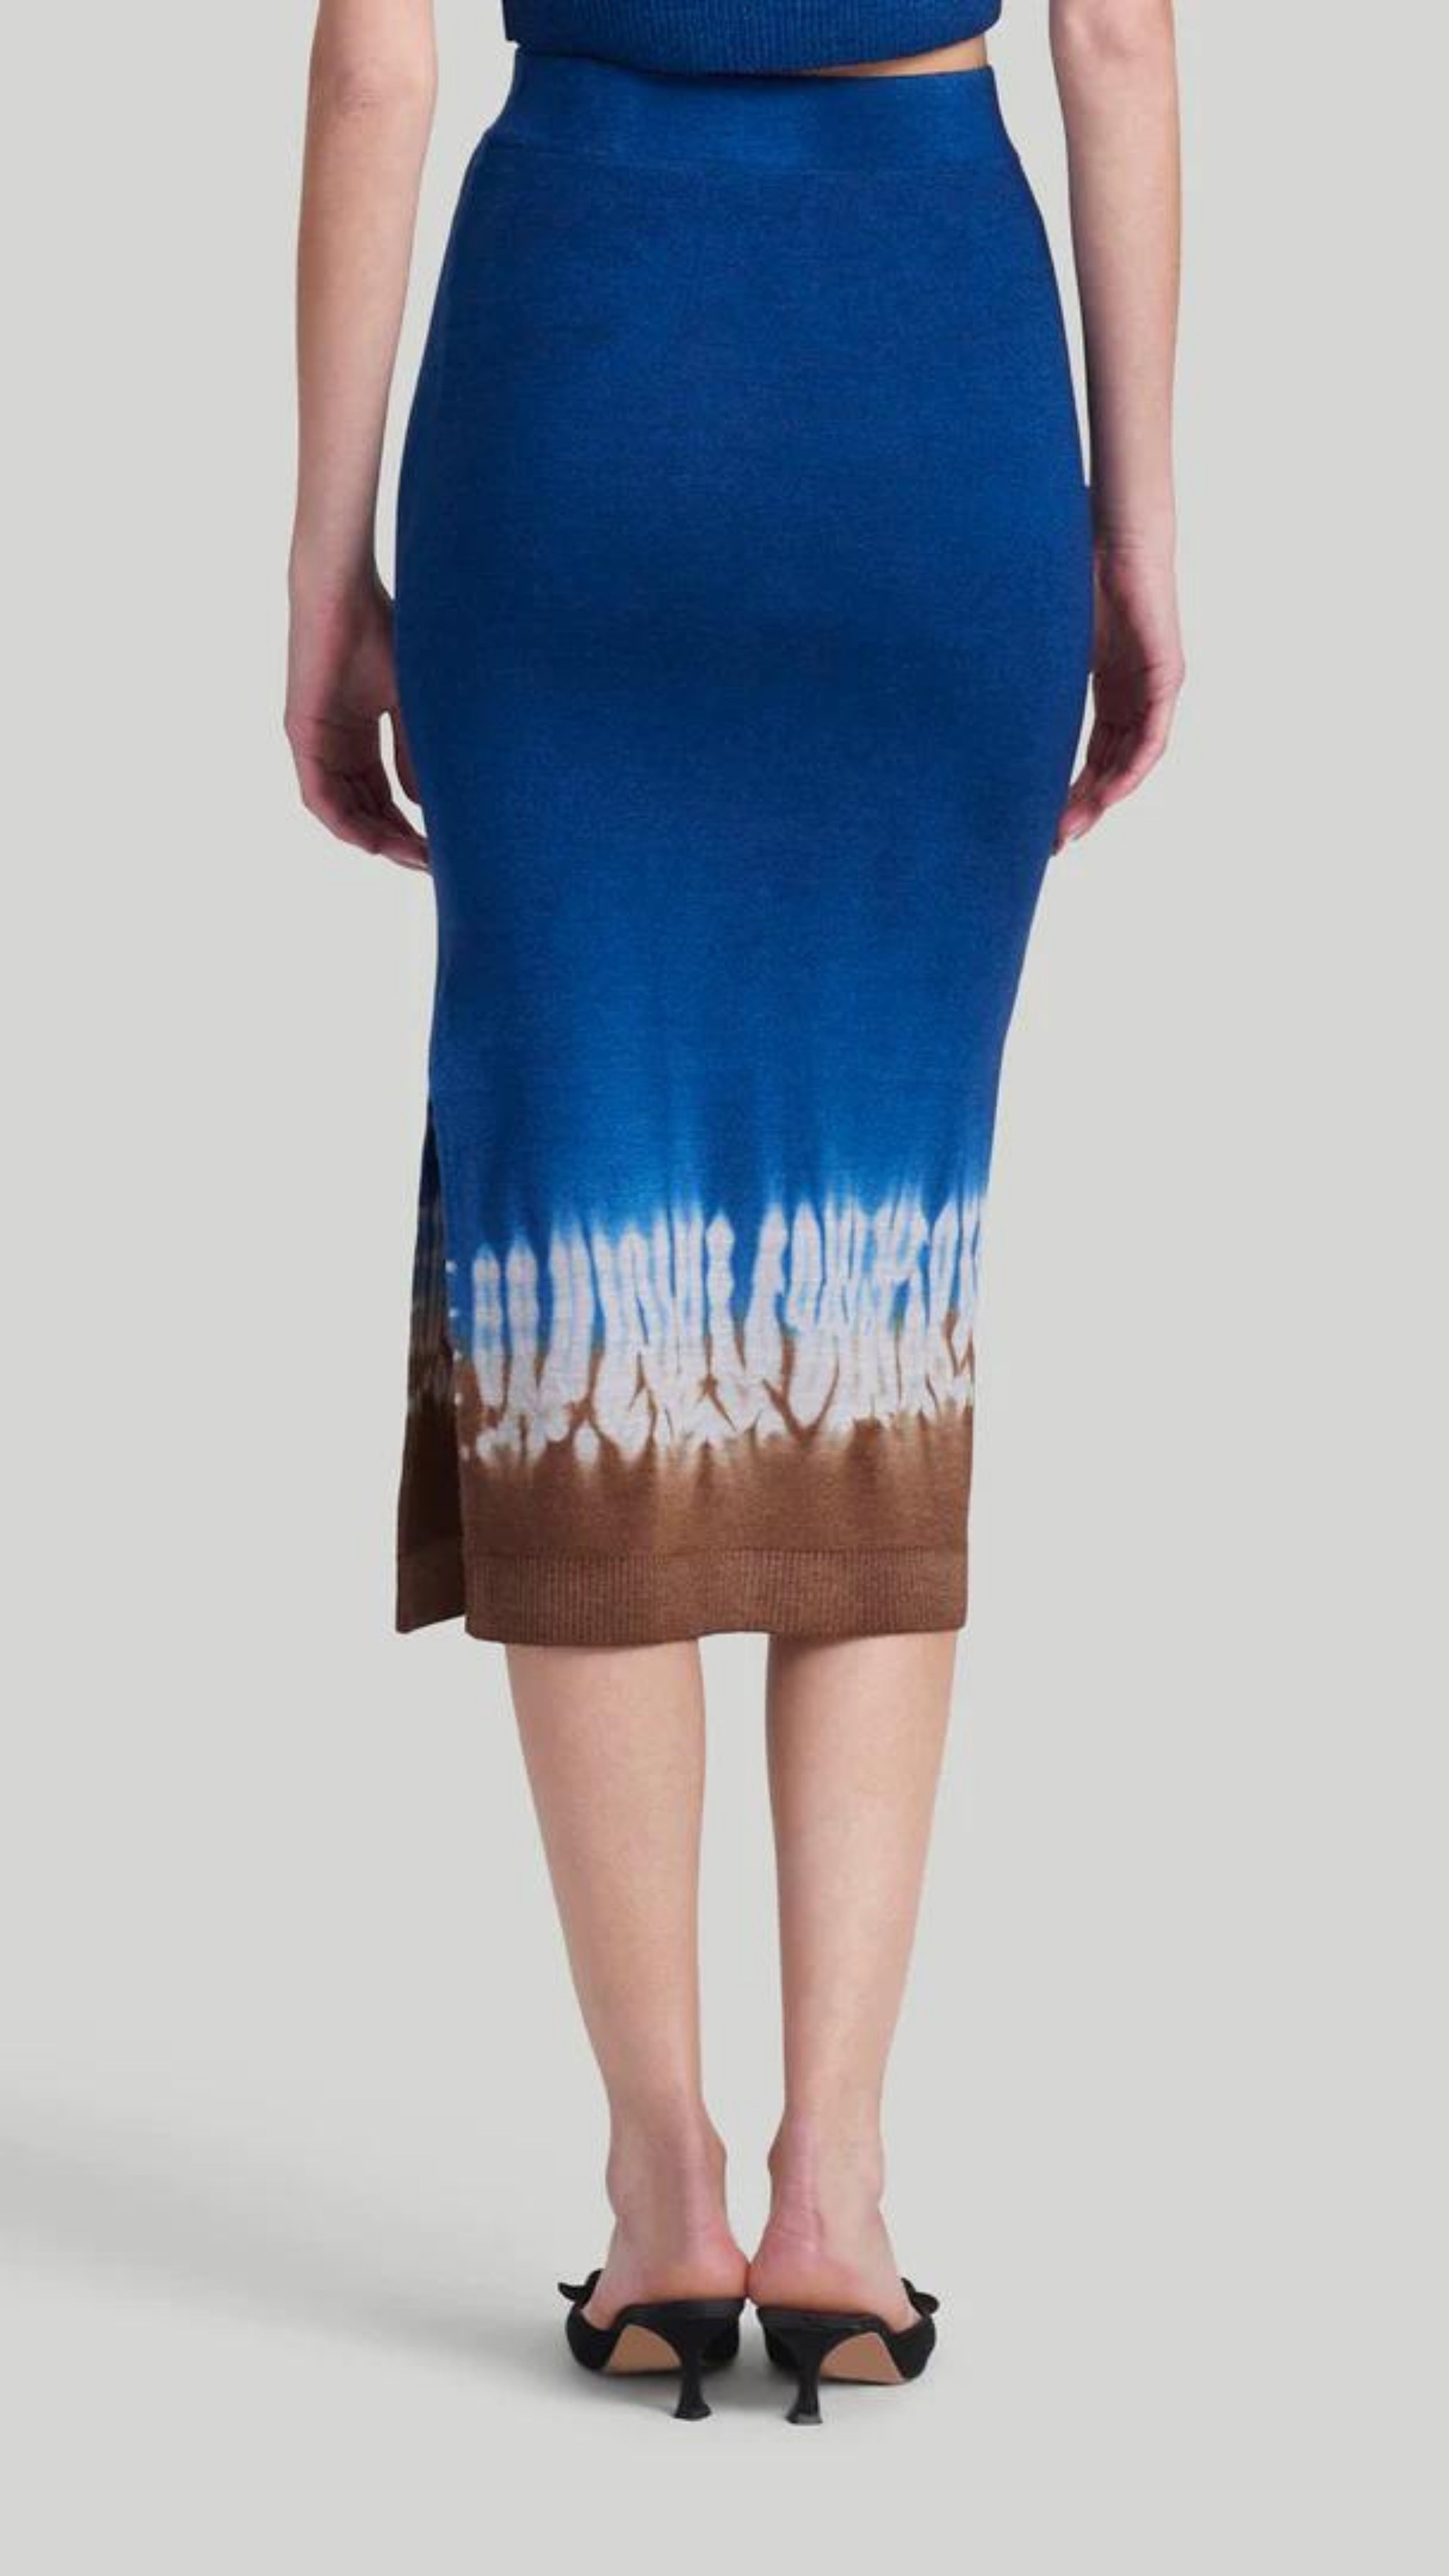 Altuzarra &#39;Morse&#39; skirt, featuring Altuzarra&#39;s iconic Shibori tie-dye technique in brown, white, and blue. Made from 100% Superfine Merino 130&#39;s wool, this high-rise pencil silhouette midi length skirt. Shown on model facing back.